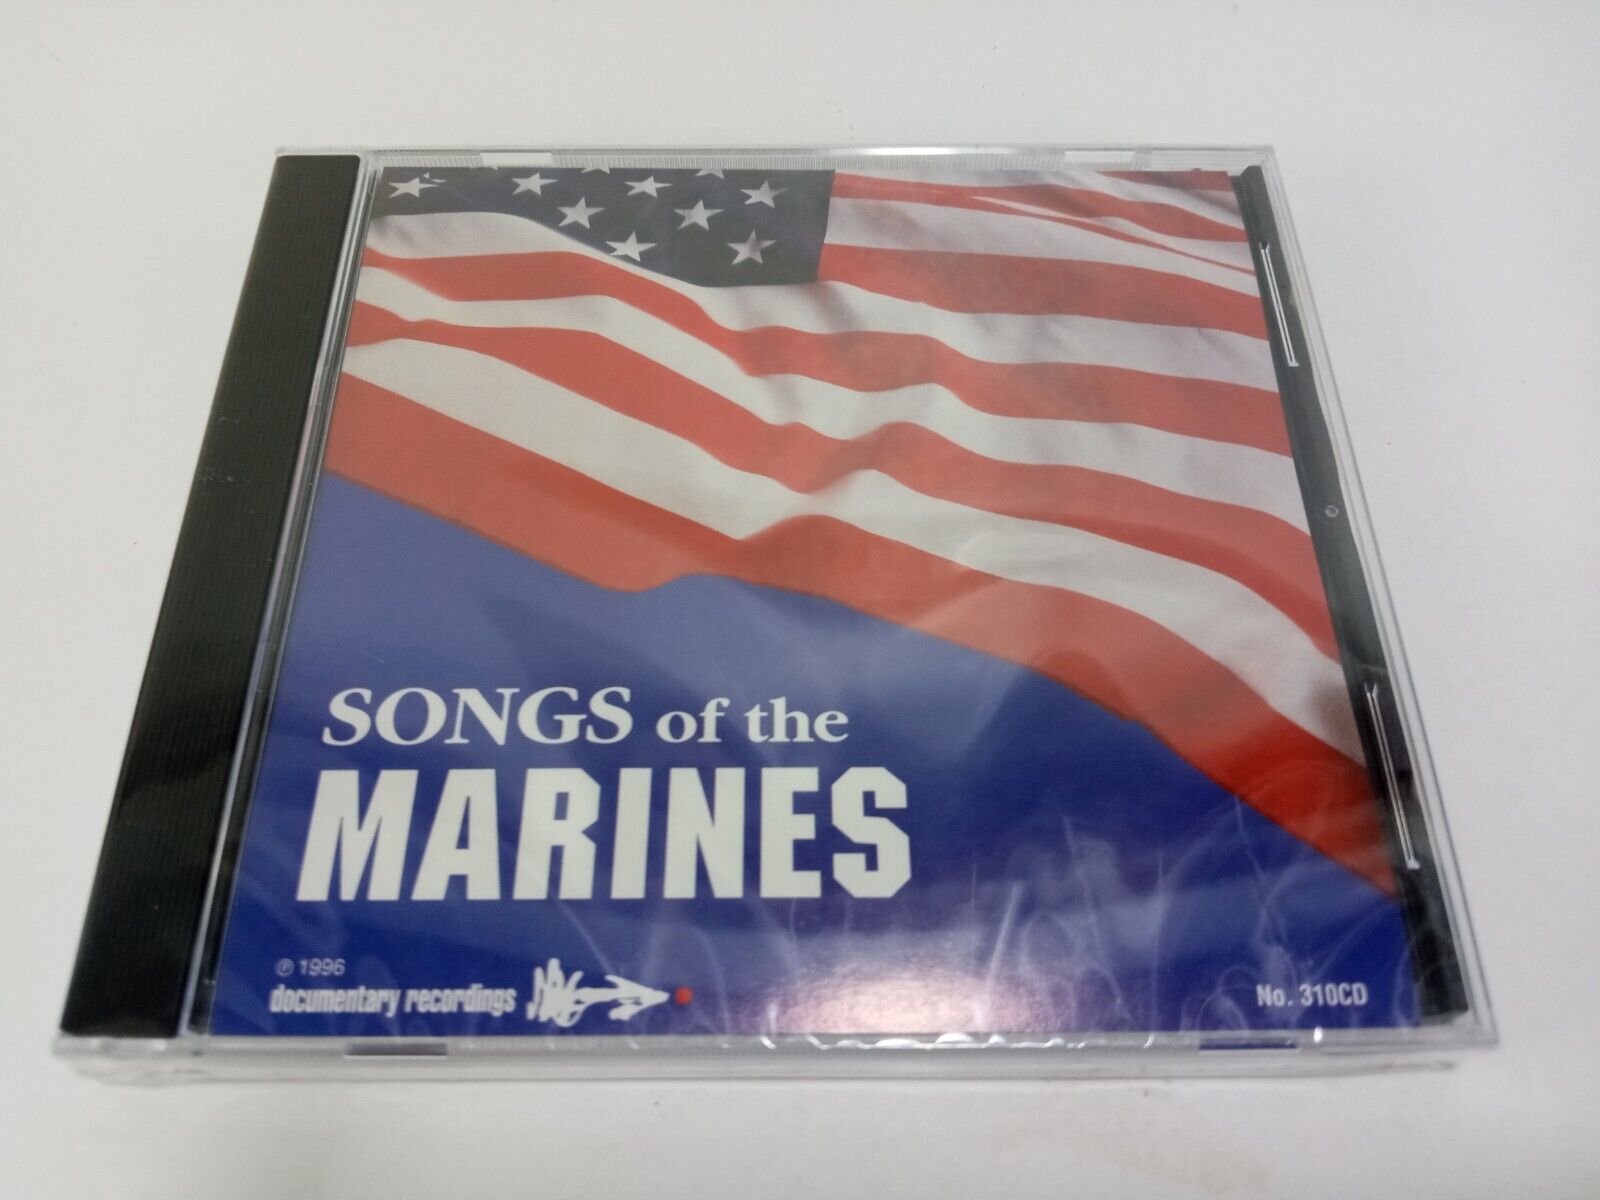 NEW SEALED RARE Songs Of The U.S. Marines 1996 NO. 310CD Flight Deck Store